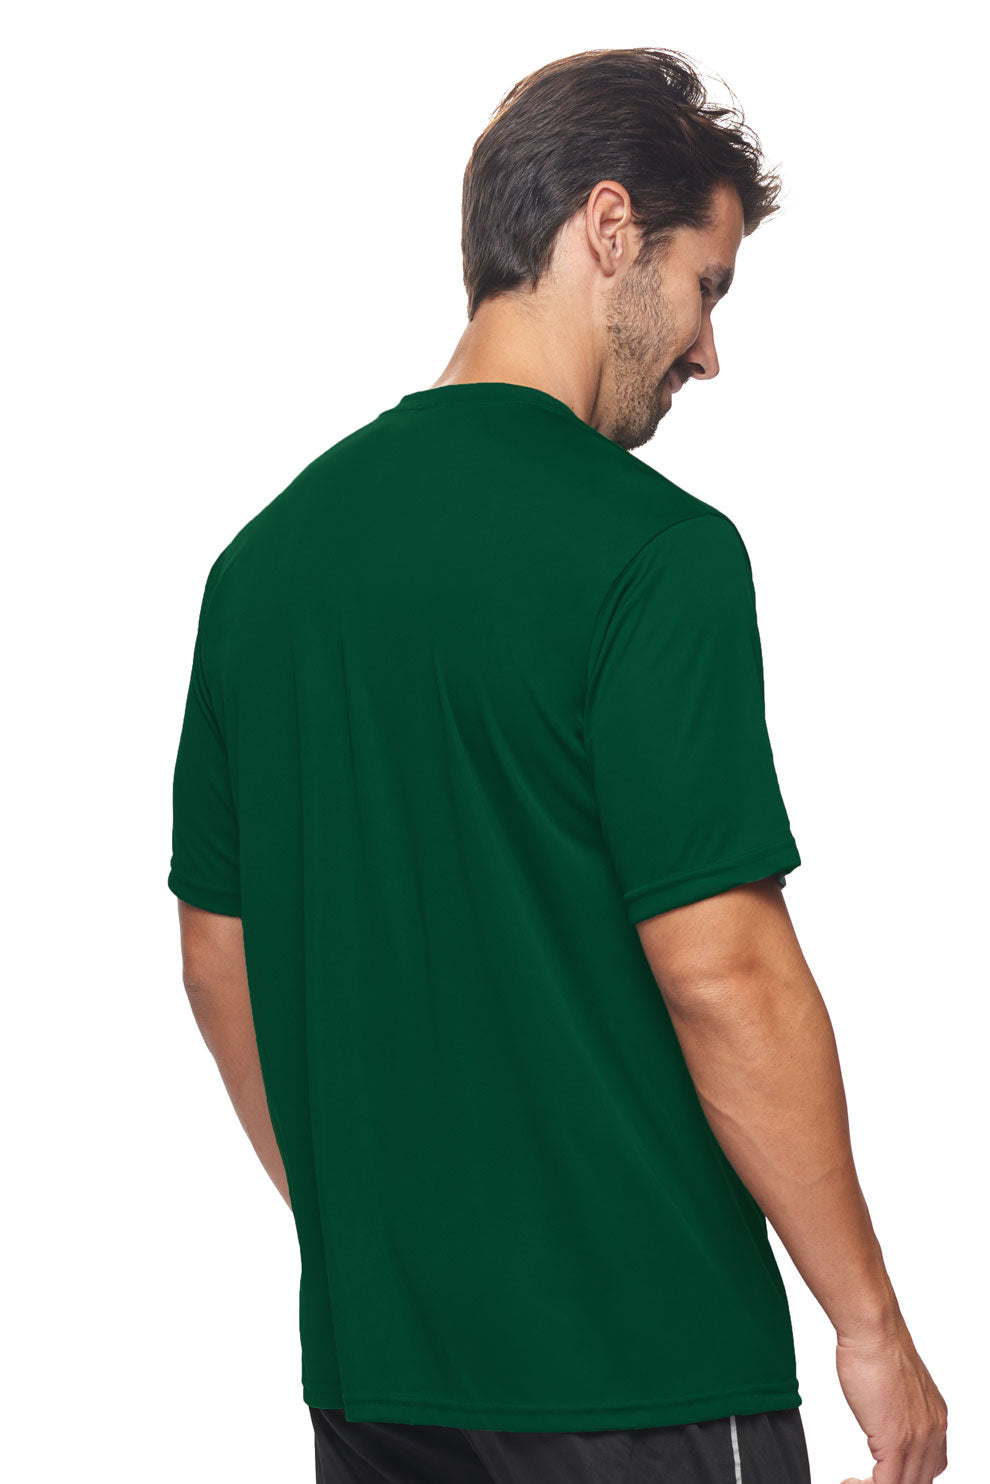 Expert Brand Wholesale Men's DriMax™ Crewneck Performance Tee Made in USA AI801D forest green image 2#forest